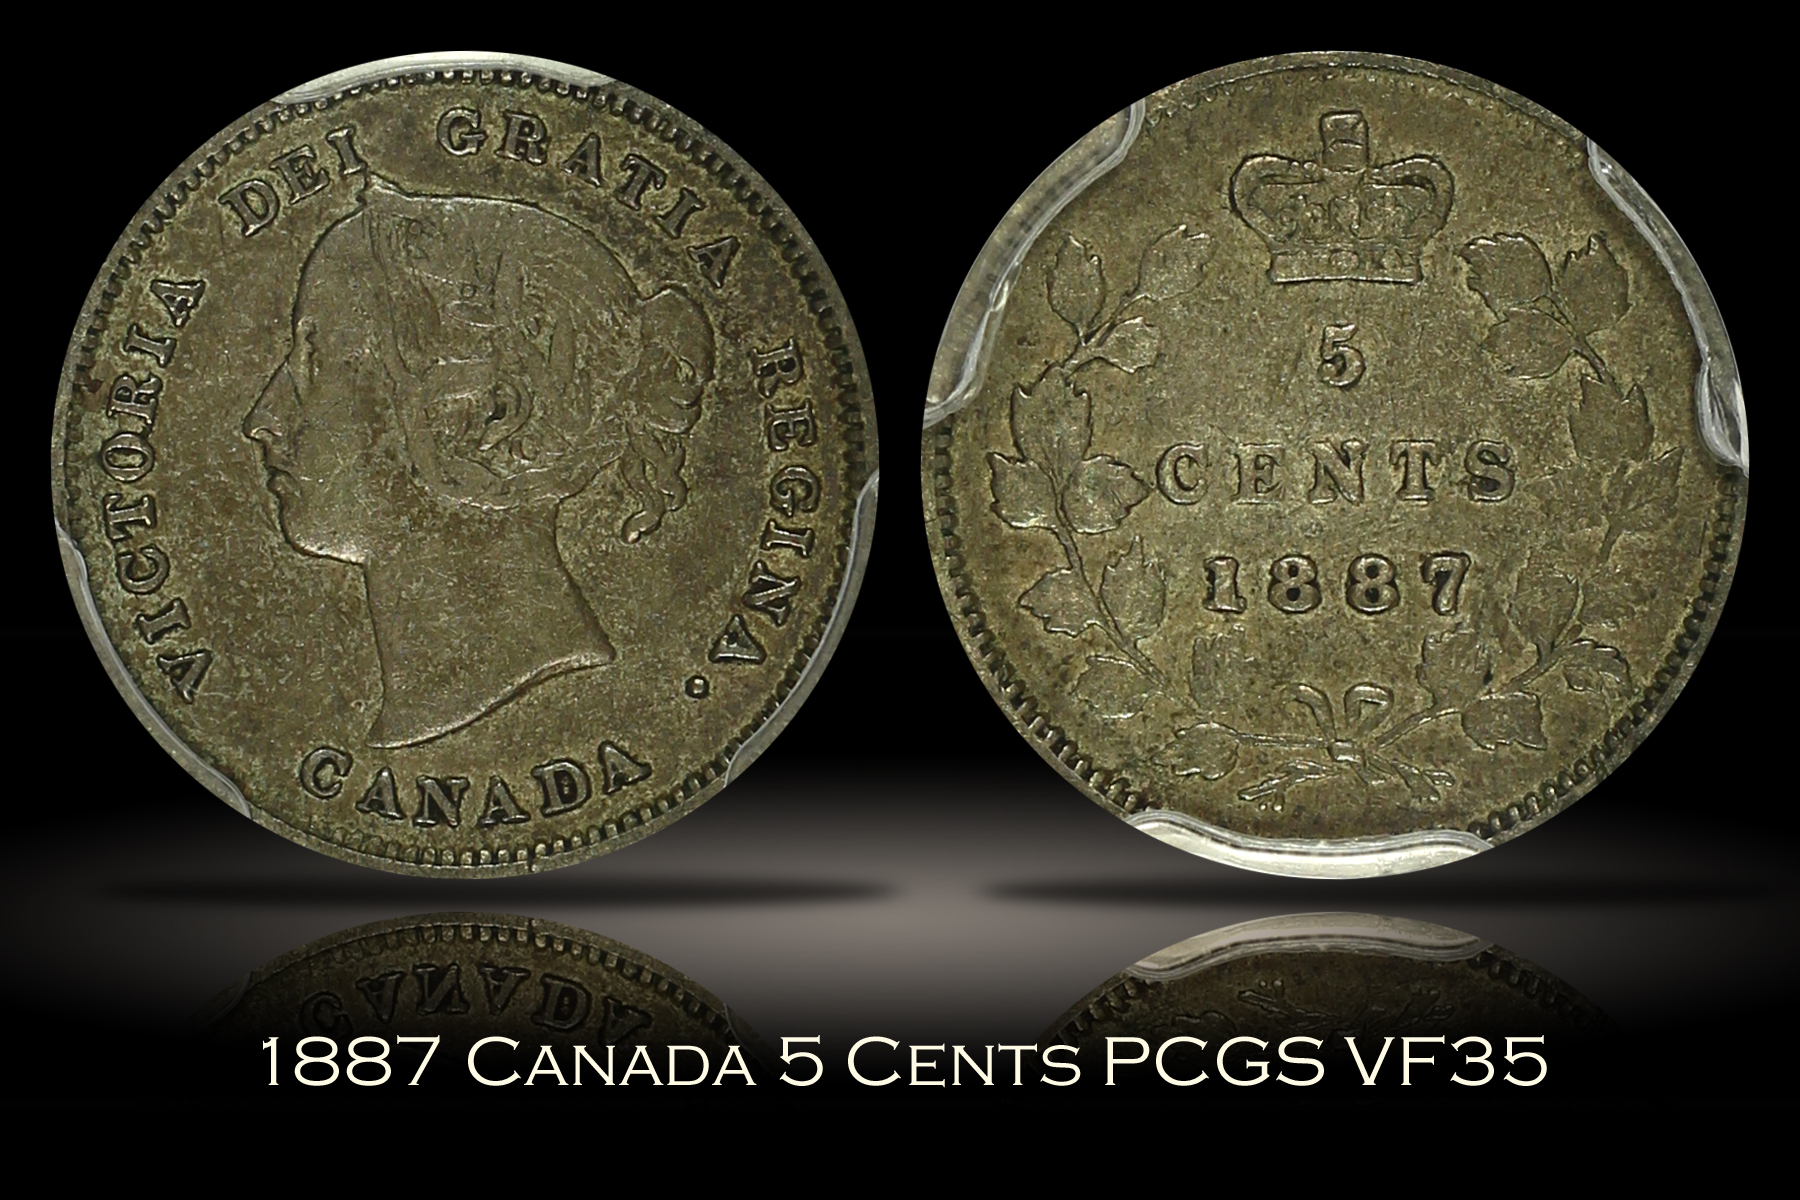 1887 Canada 5 Cents PCGS VF35